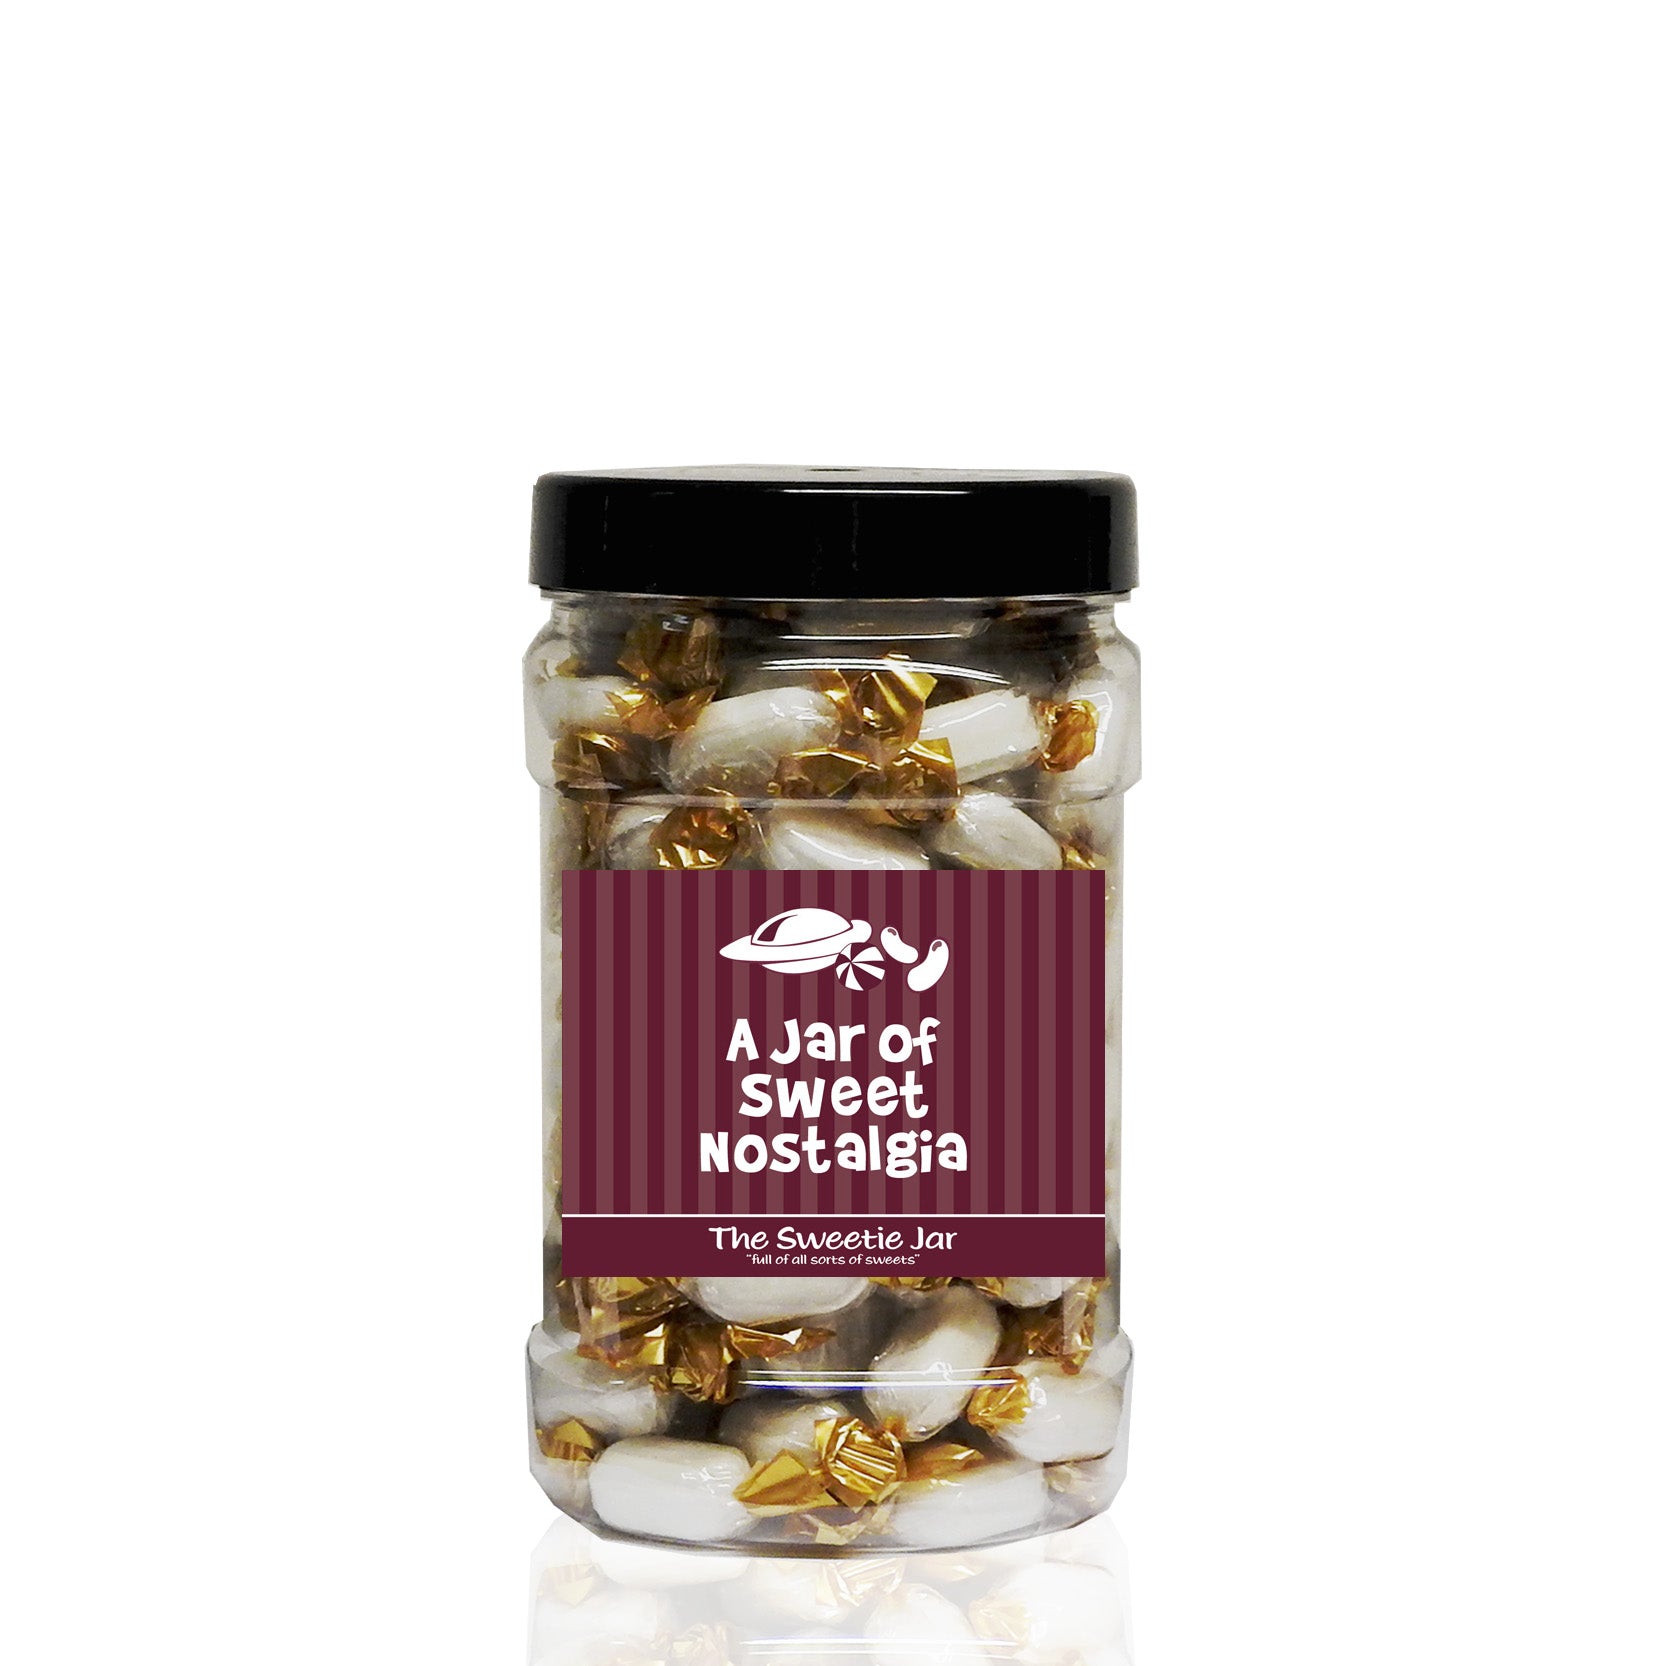 A Small Jar of Chocolate Mints - Mint Flavour Boiled Sweets with a Chocolate Centre